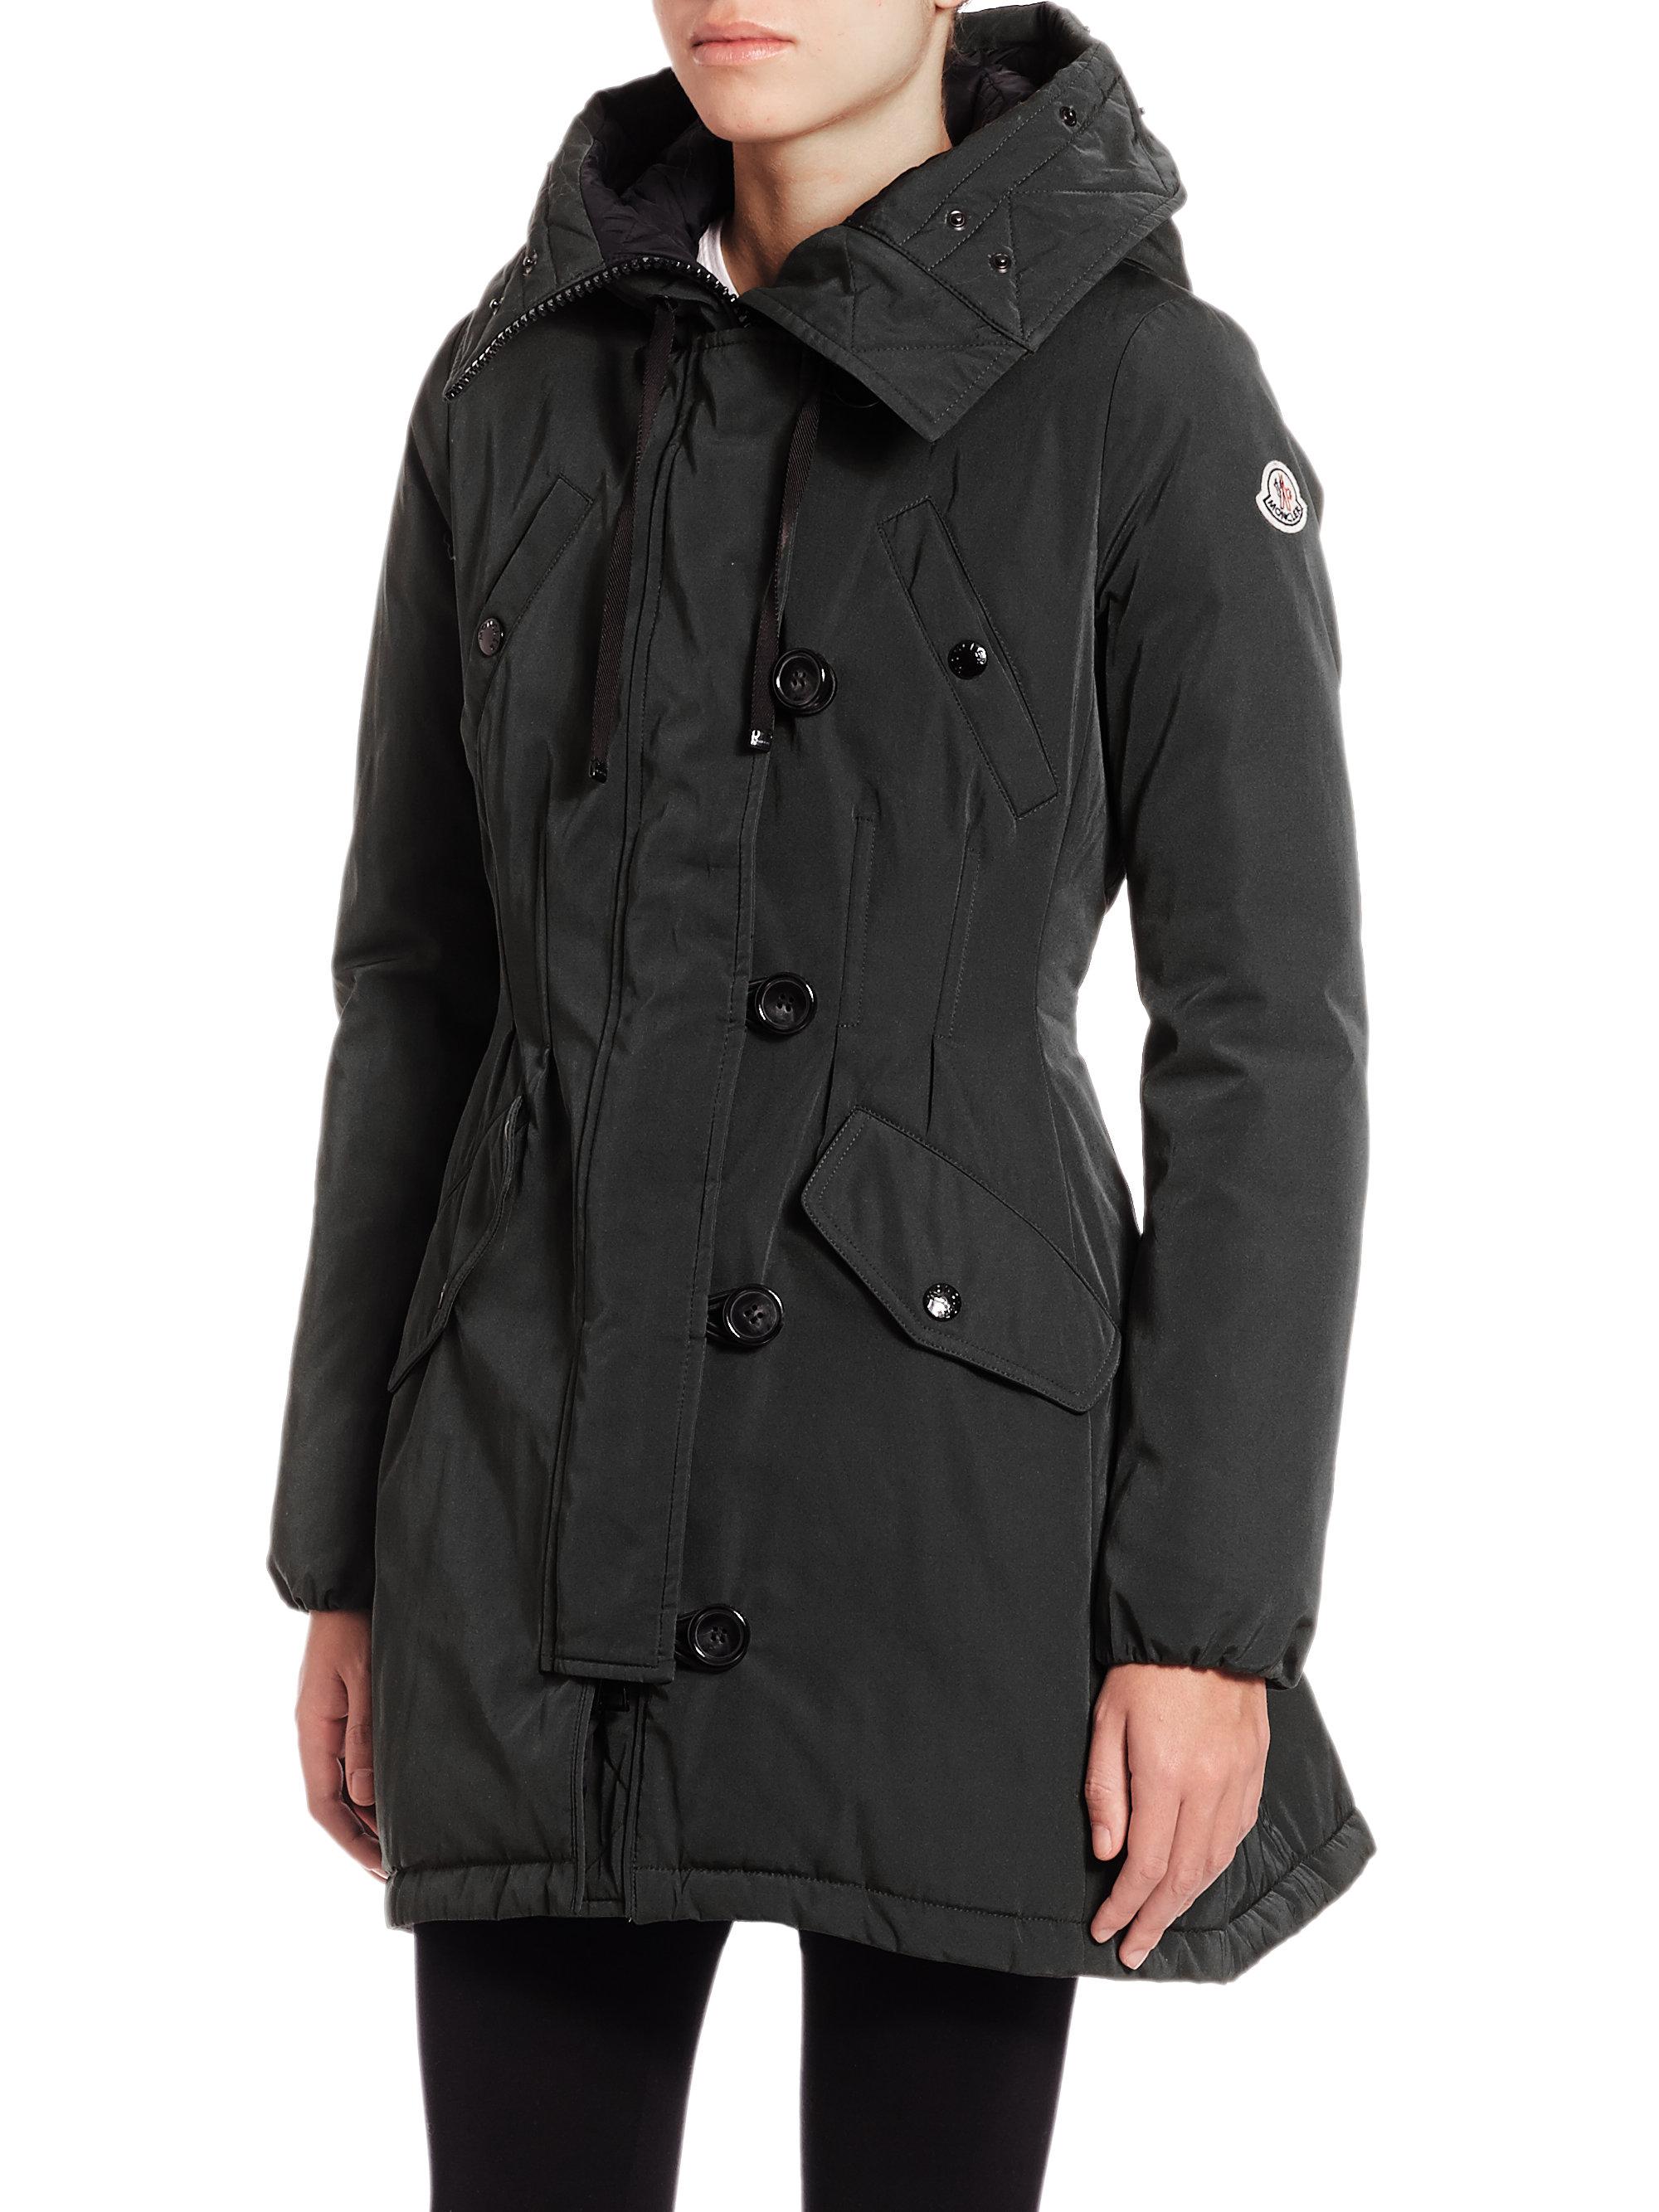 Moncler Synthetic Aredhel Fur-trimmed Jacket in Black - Lyst